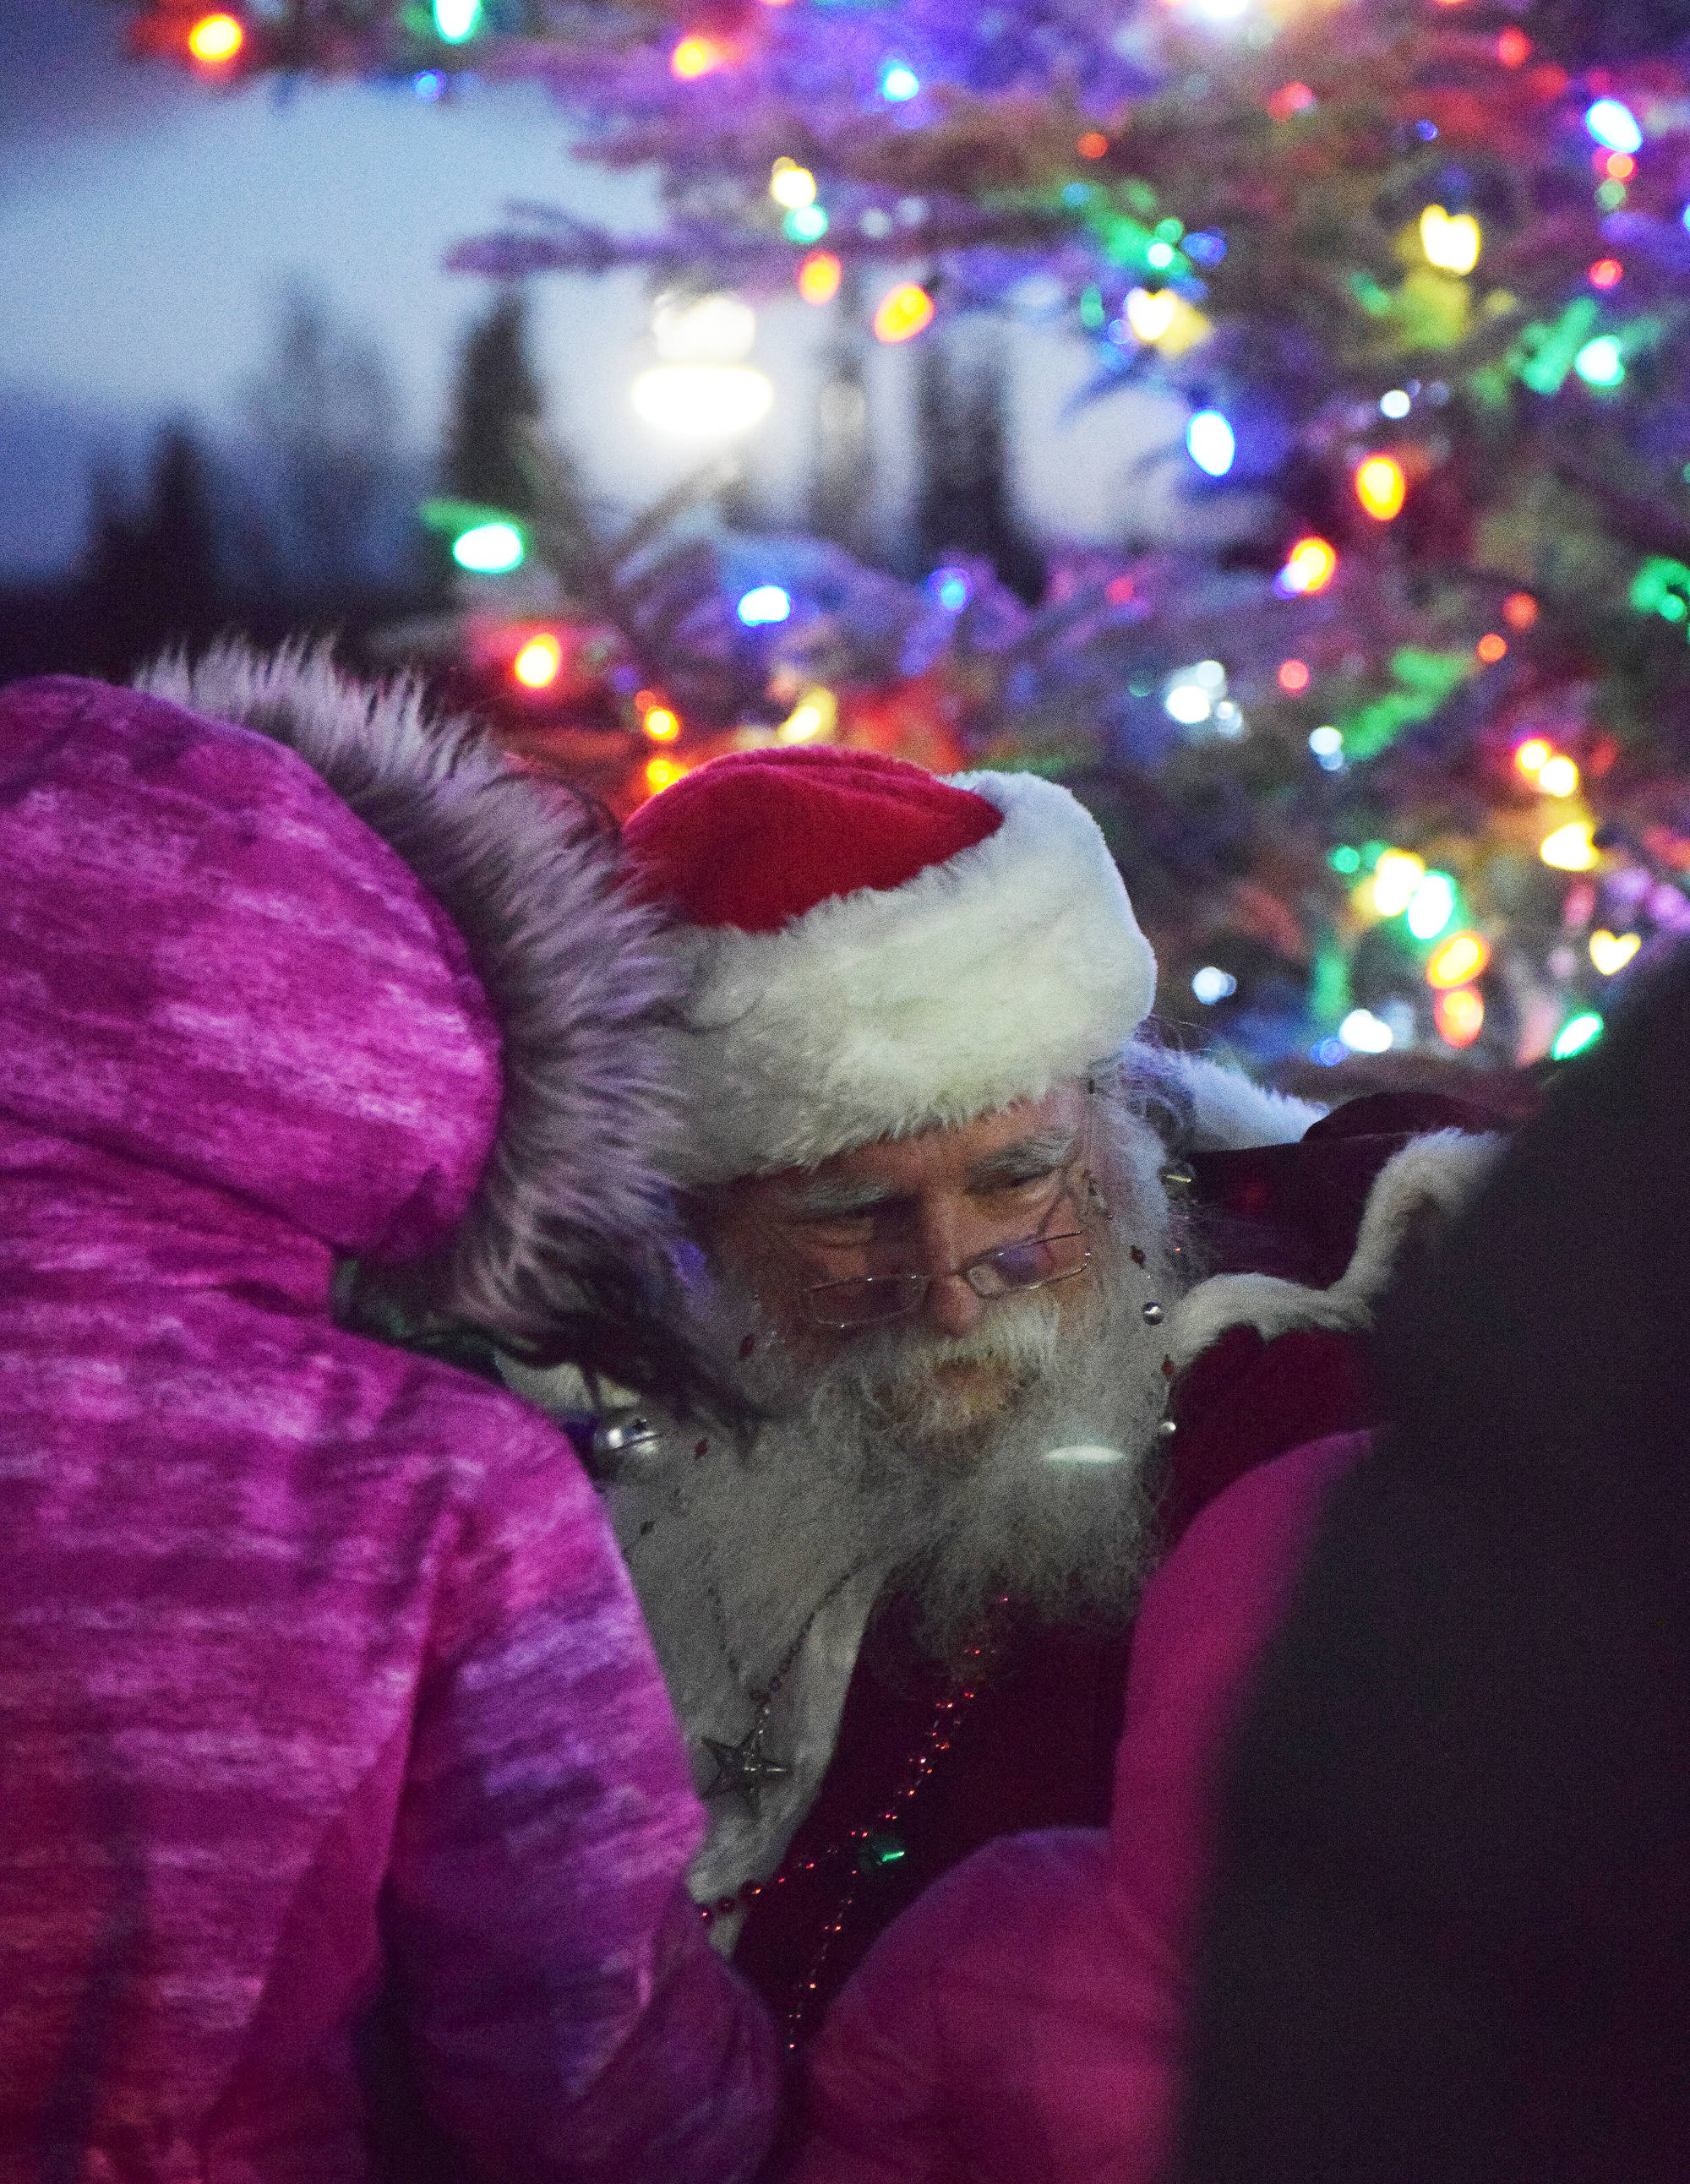 Santa Claus listens to requests from children Saturday, Dec. 1 at the Christmas in the Park tree-lighting ceremony at Soldotna Creek Park, in Soldotna, Alaska. (Photo by Joey Klecka/Peninsula Clarion)